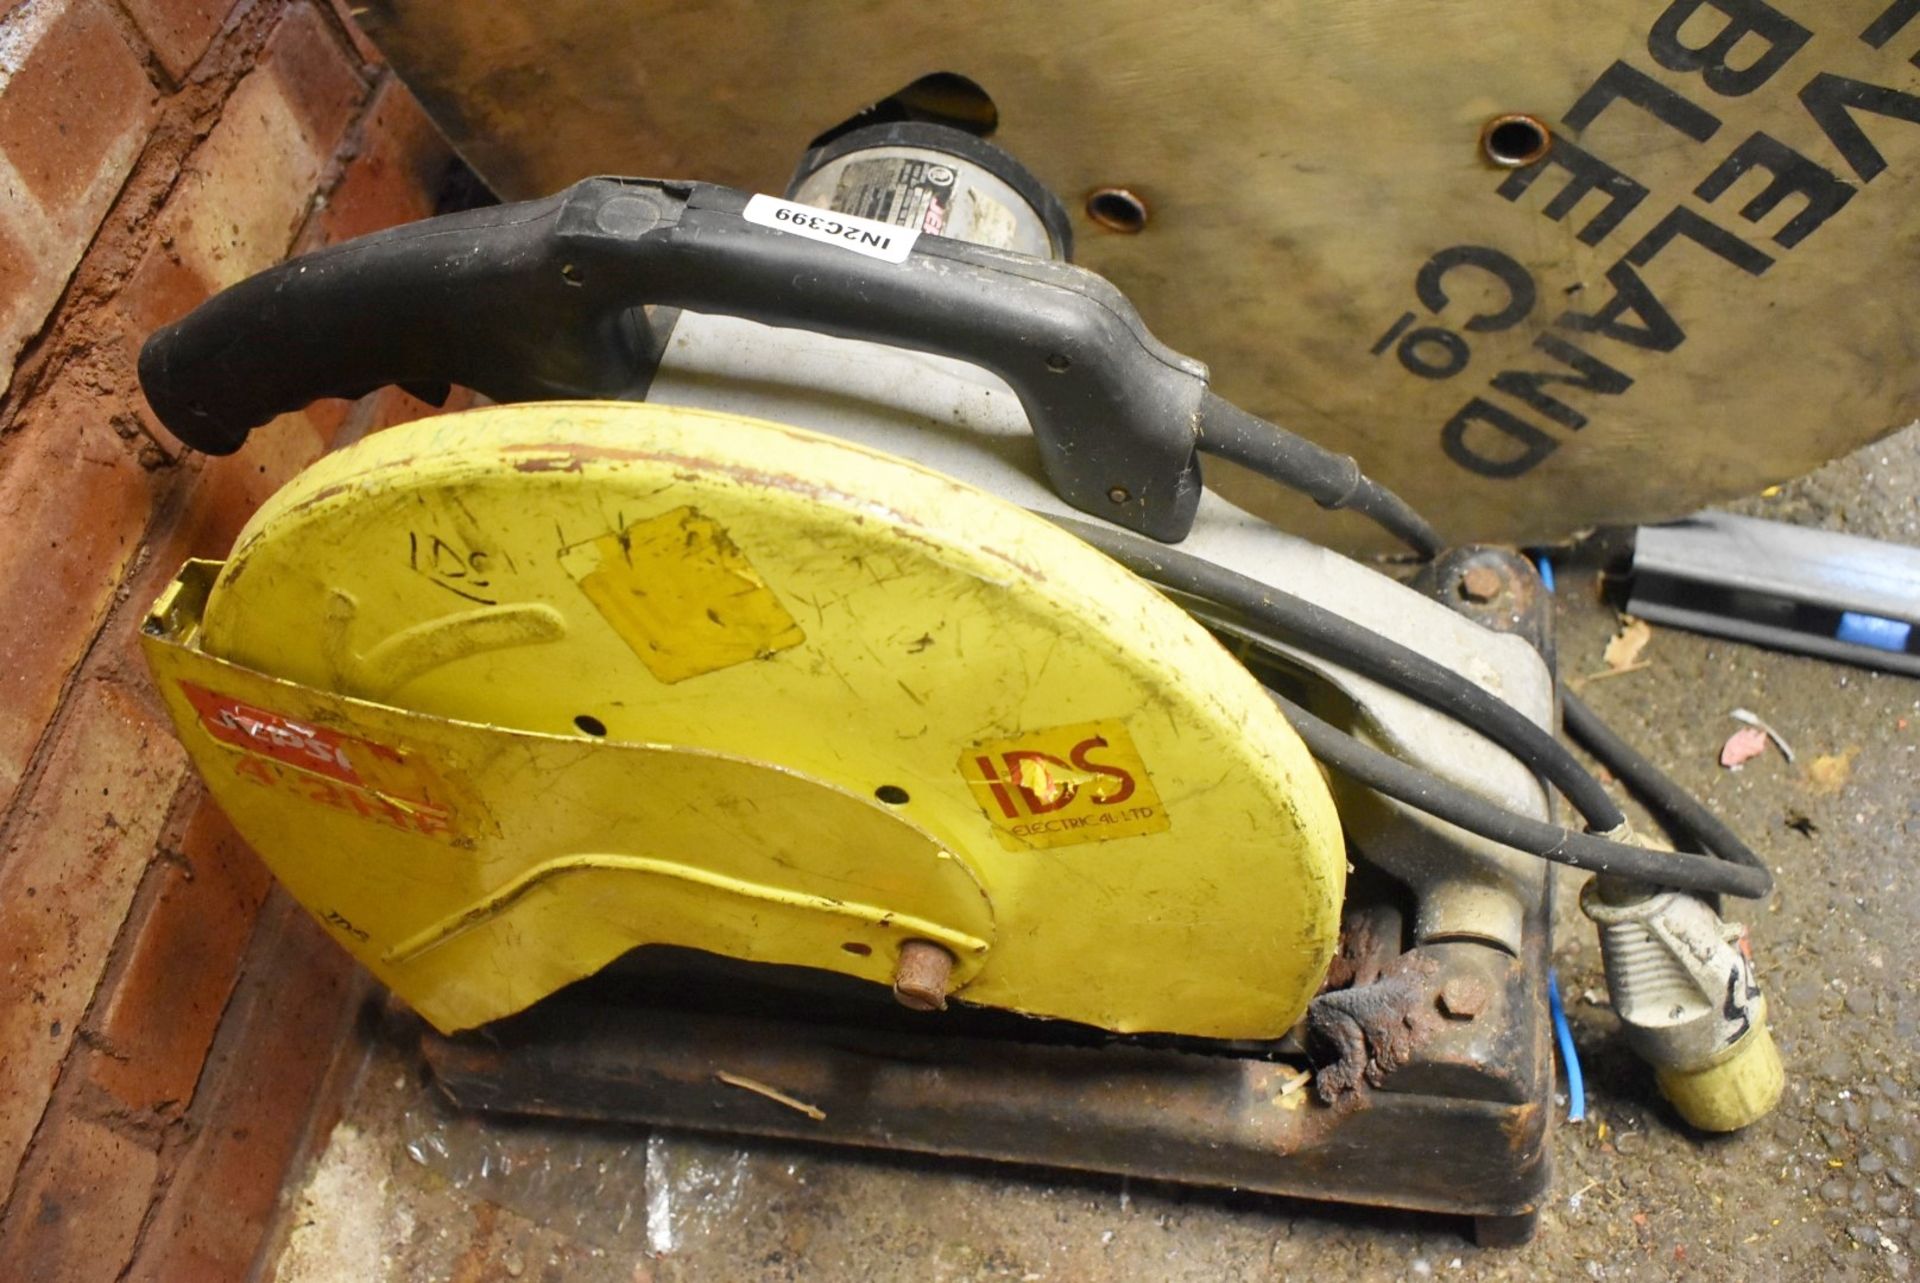 1 x Jepson 14 Inch Cut Off Saw 110v - Image 3 of 3